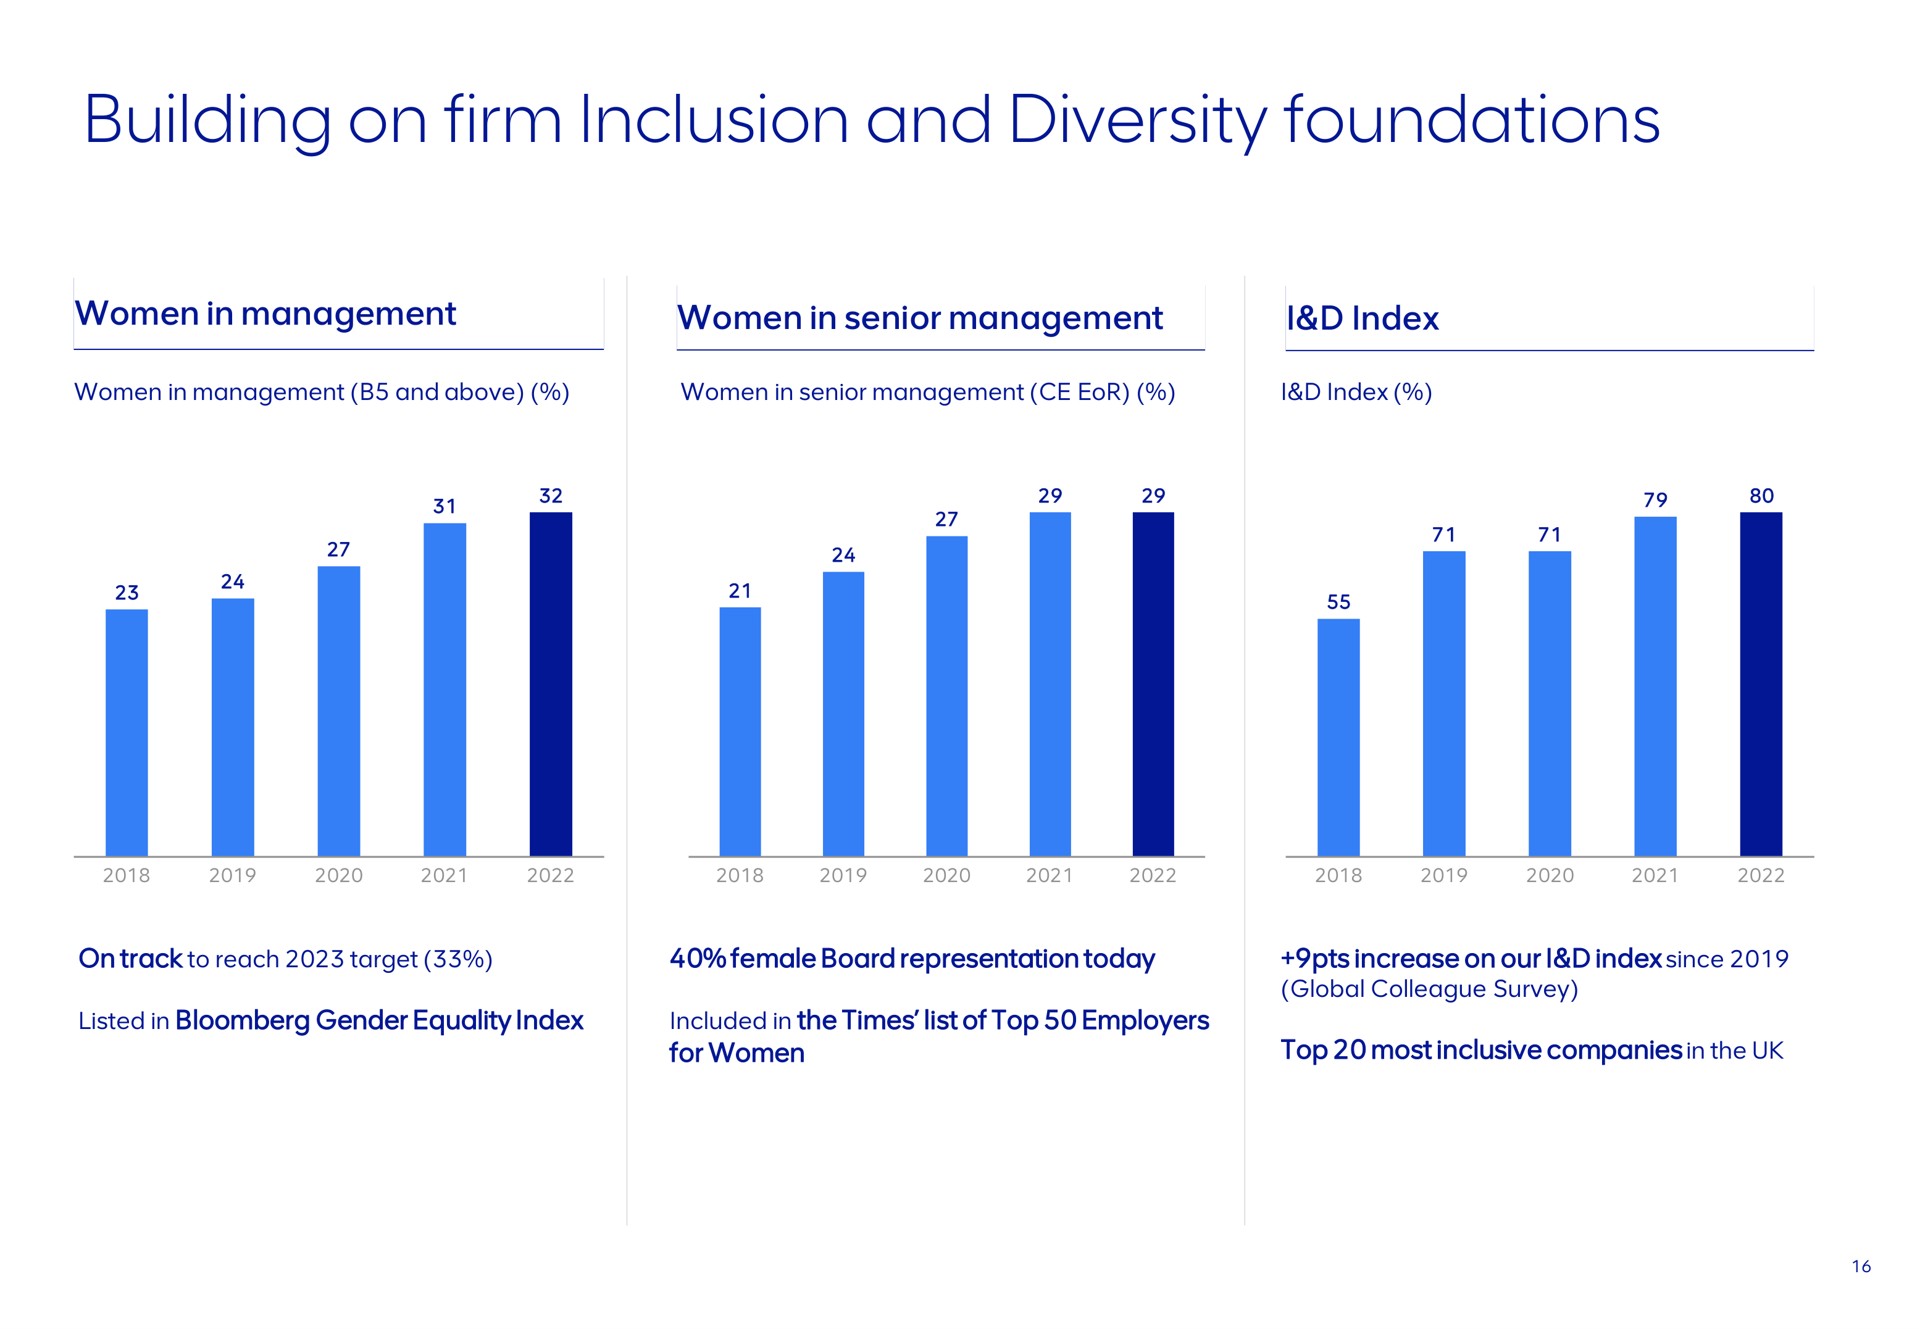 building on firm inclusion and diversity foundations | AngloAmerican